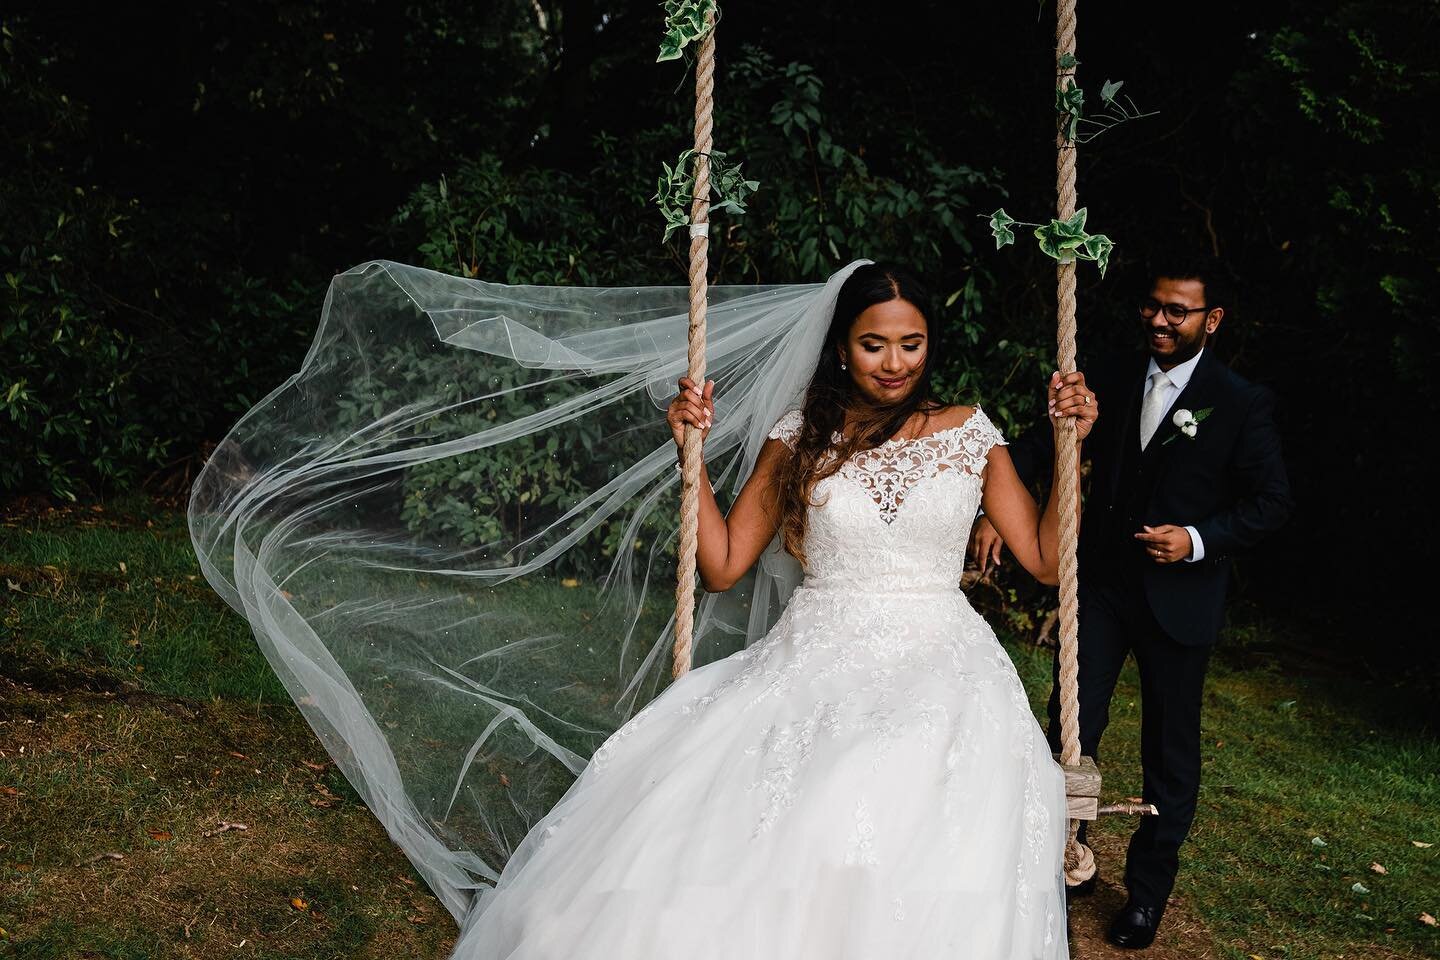 &ldquo;You know you're in love when you can't fall asleep because reality is finally better than your dreams&rdquo;
Vindya &amp; Mario at @delameremanor @delamereevents 
85% booked for 2019&nbsp;
70% booked for 2020&nbsp;
10% booked for 2021&nbsp;
Ge